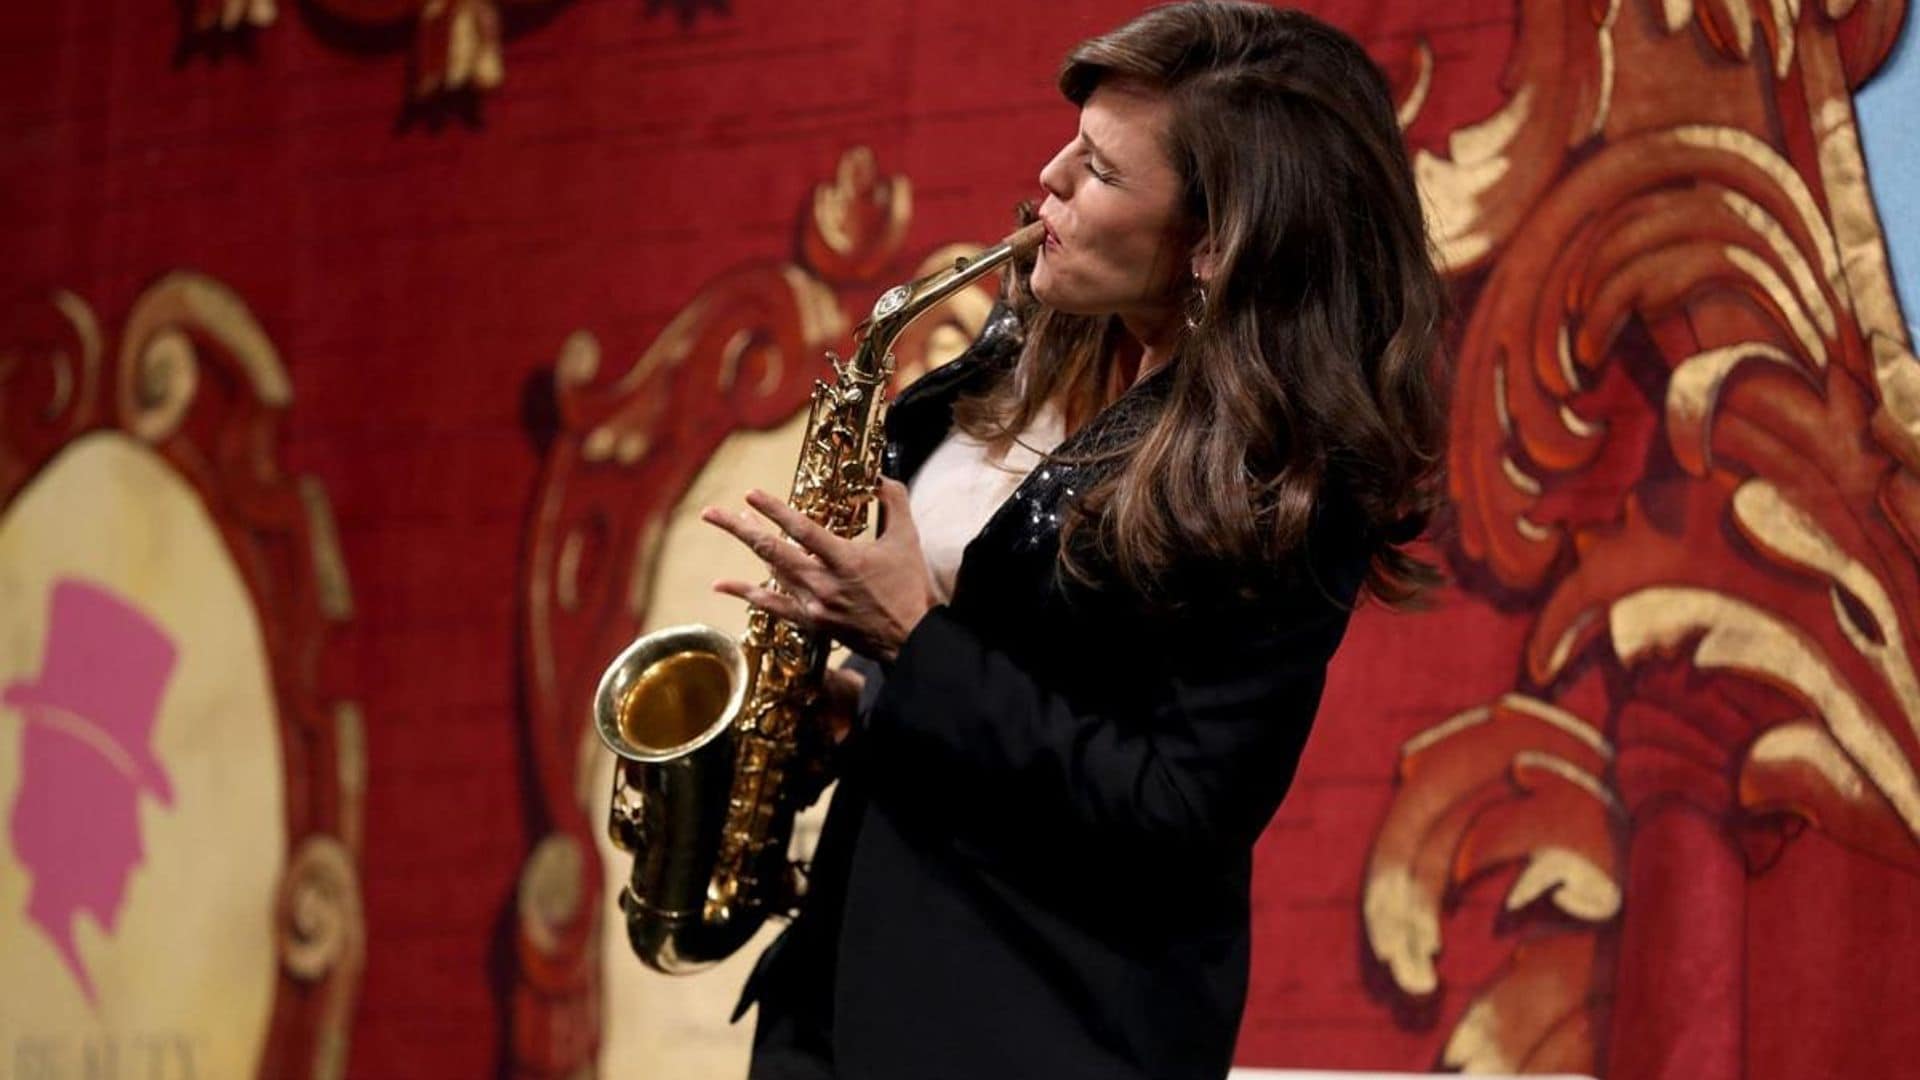 Jennifer Garner proudly plays the saxophone during Hasty Pudding’s Woman of the Year ceremony